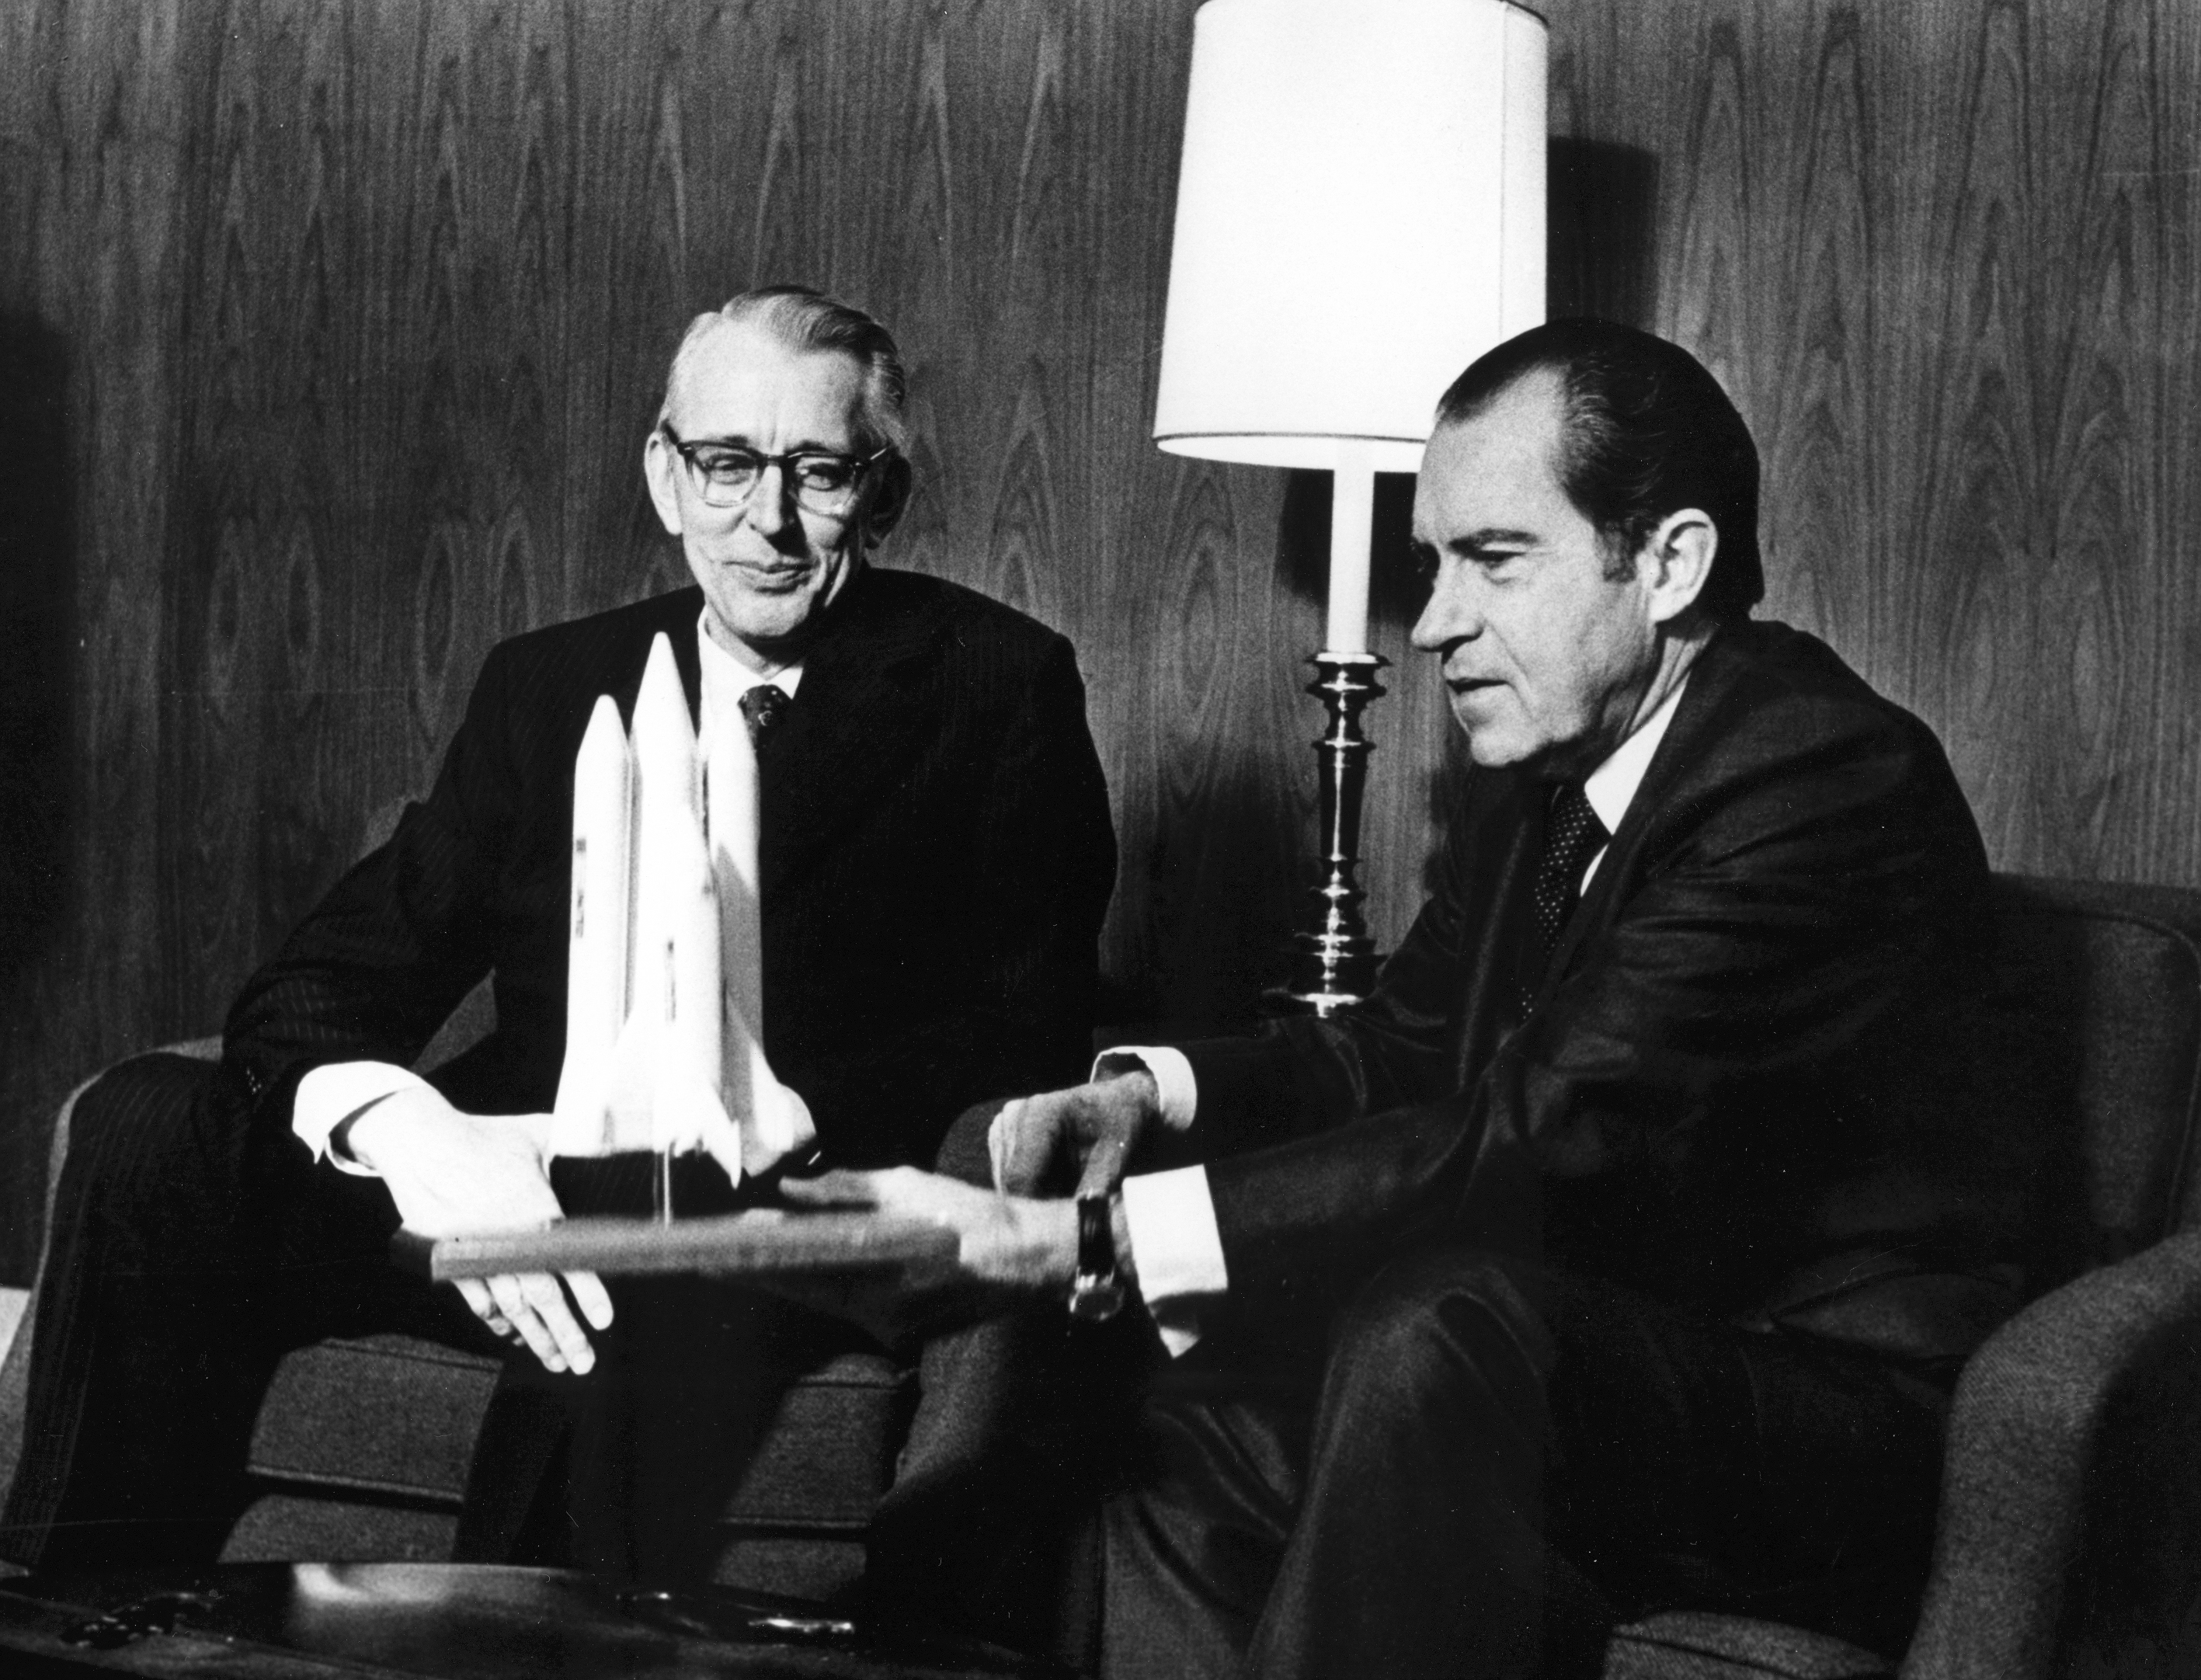 NASA Administrator James C. Fletcher, left, and President Richard M. Nixon announce the approval to proceed with space shuttle development in 1972